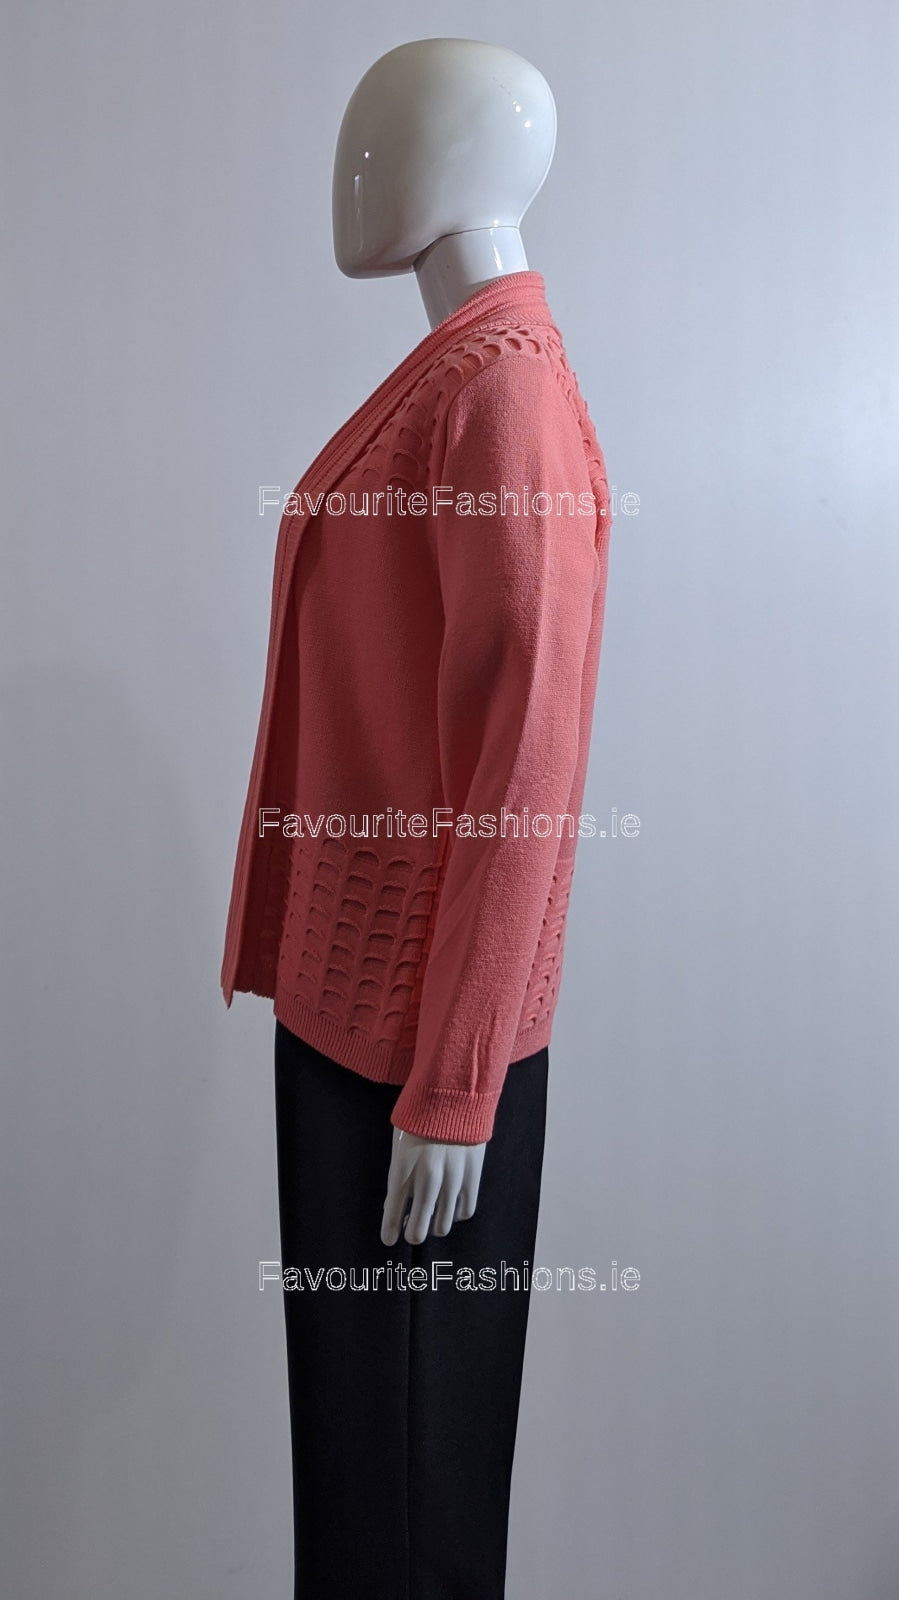 Coral Open Cardigan